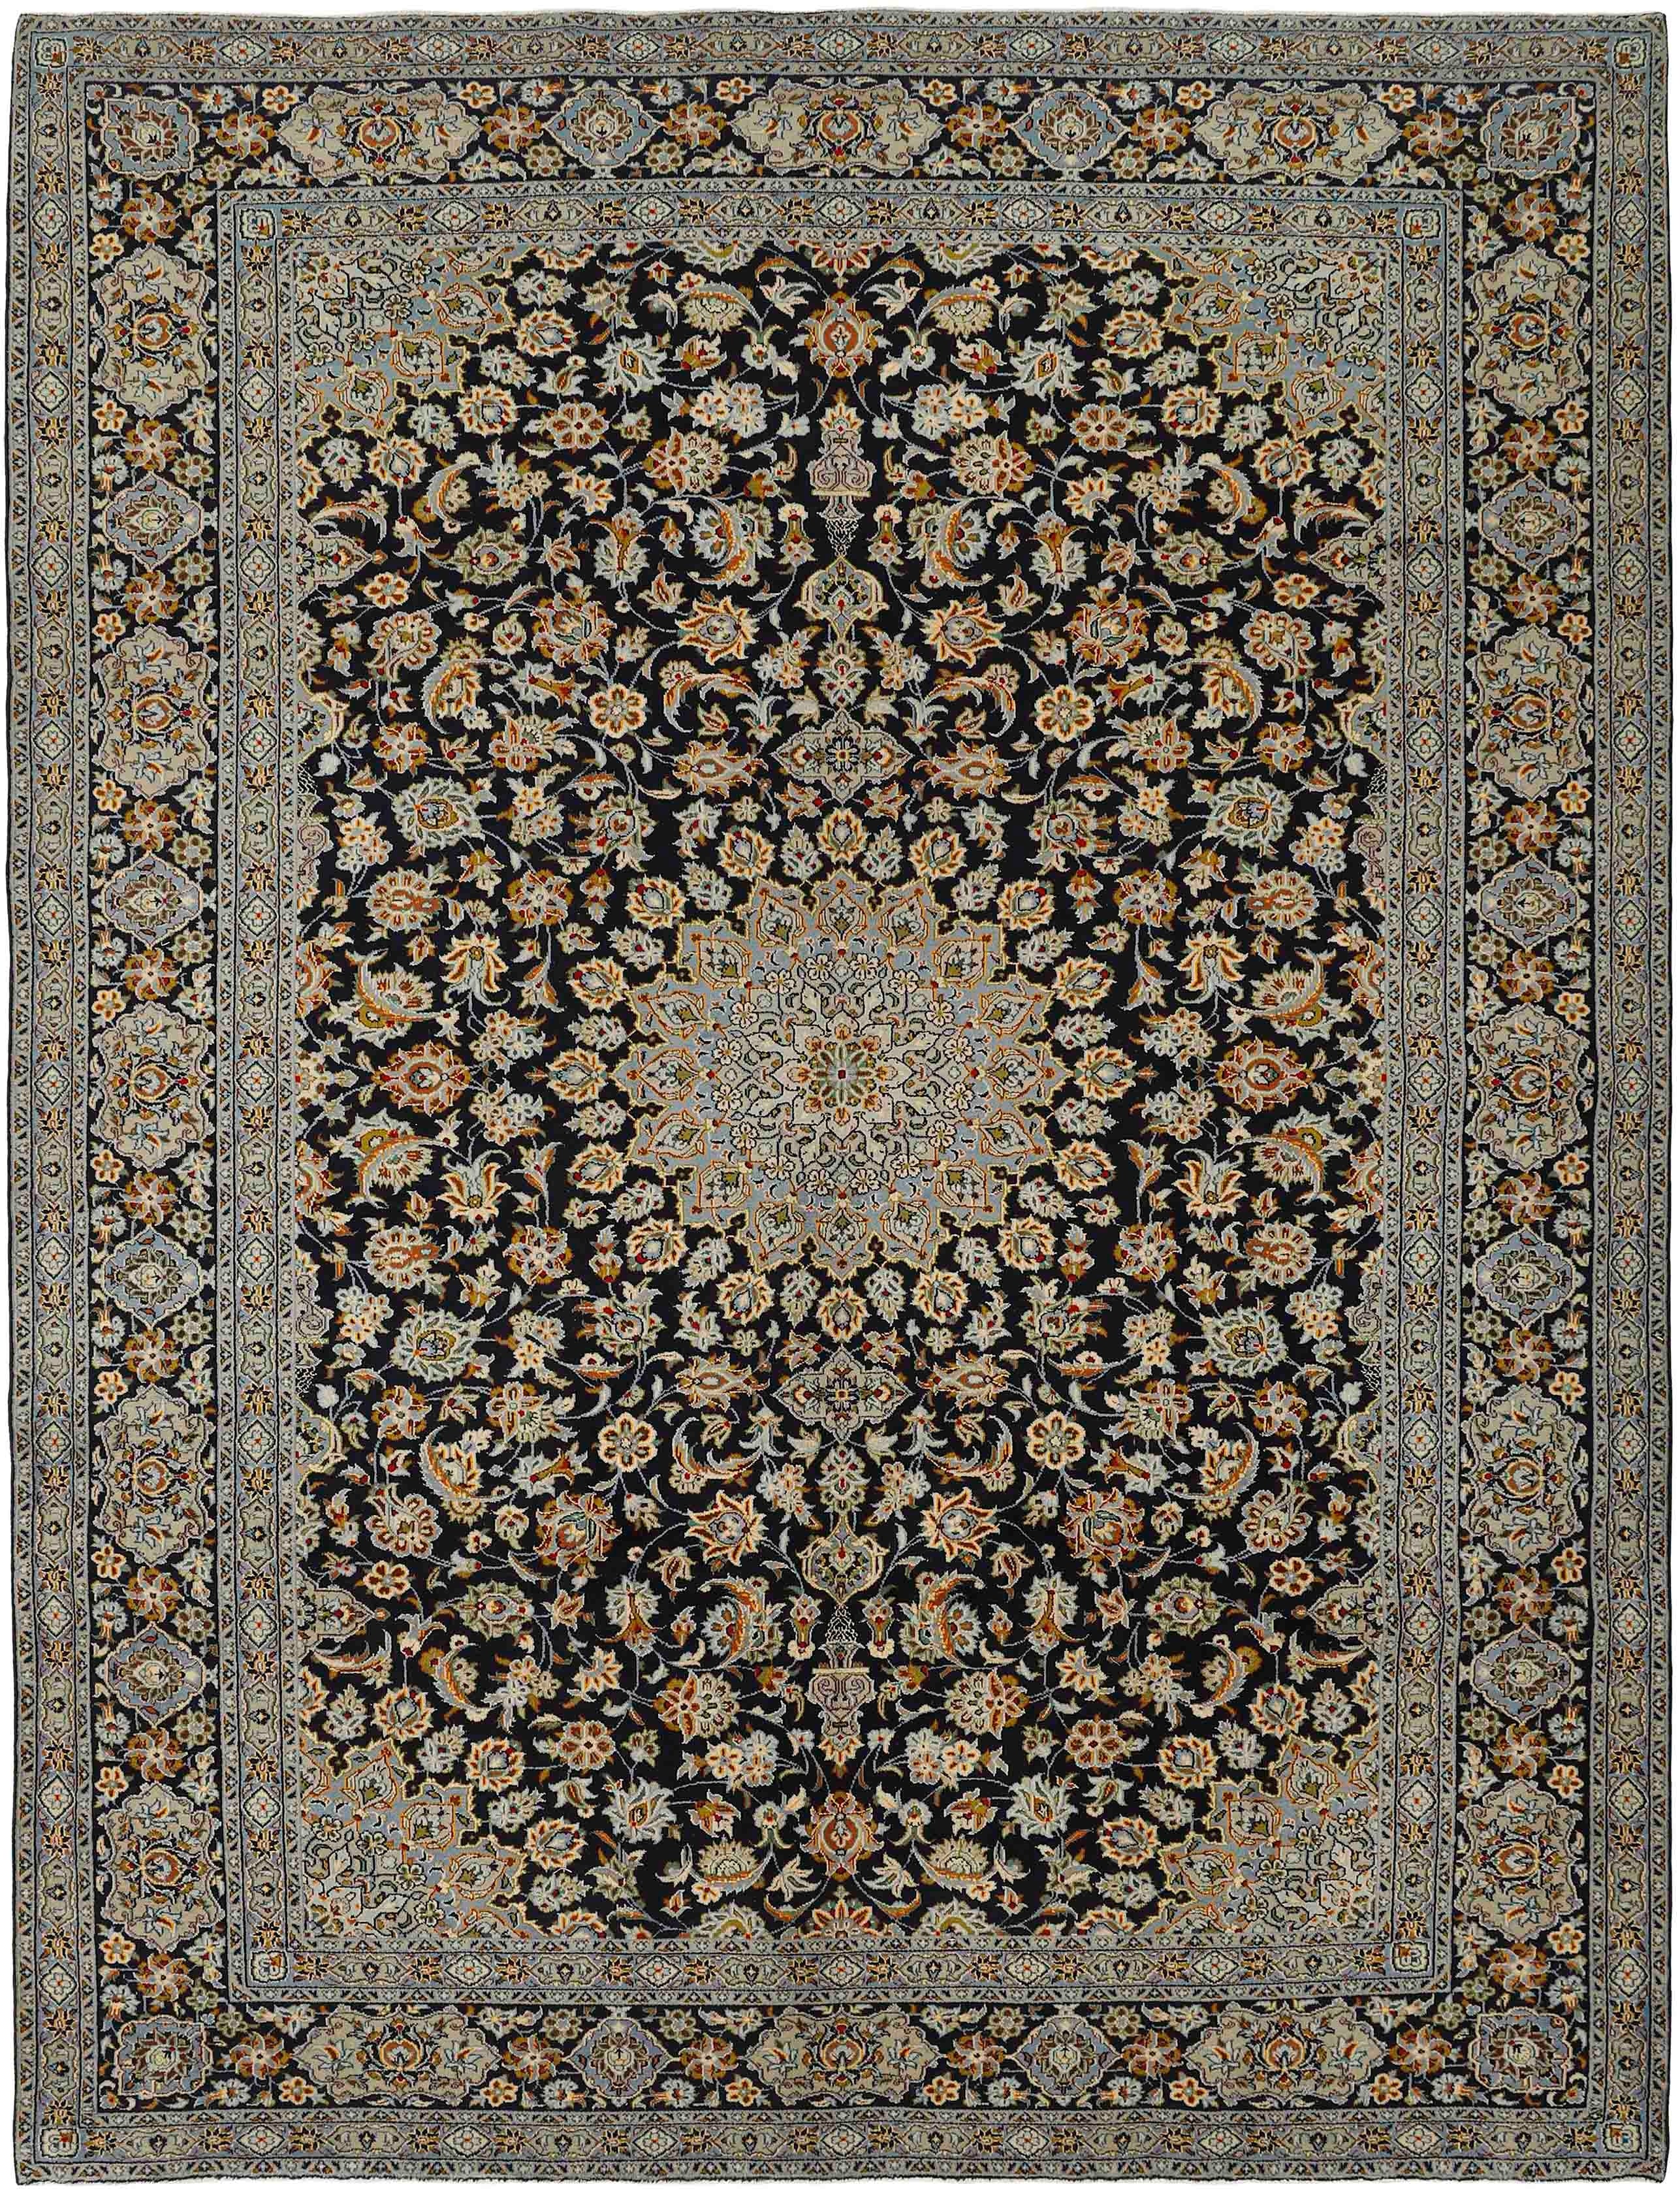 Authentic persian rug with traditional floral design in black, blue and beige